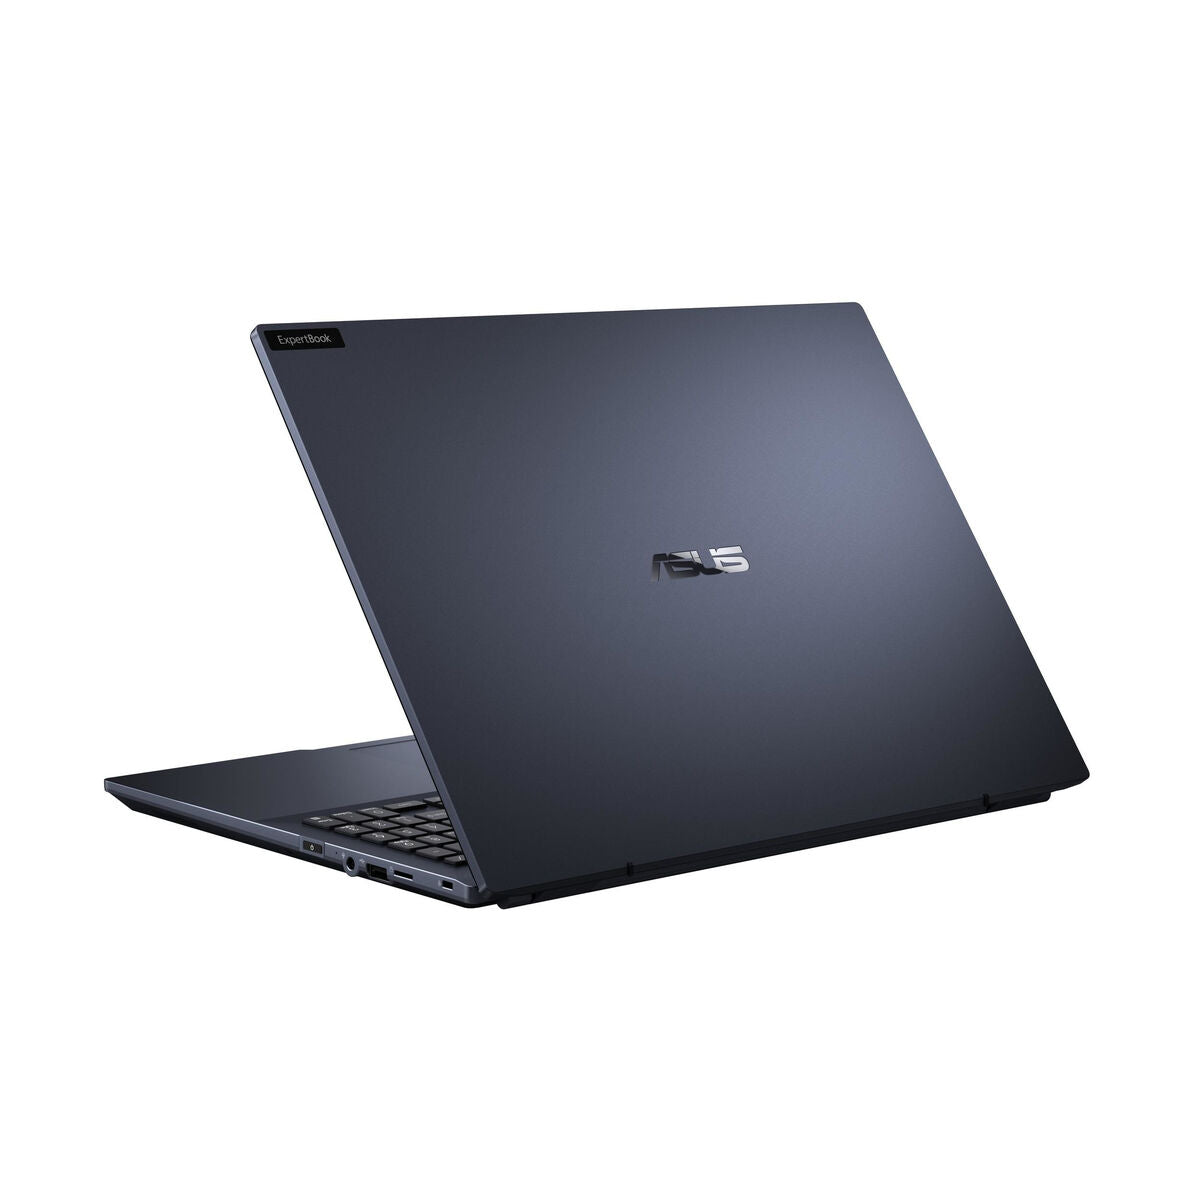 Laptop Asus ExpertBook B5 B5602 B5602CBA-MB0419X Spanish Qwerty 16" Intel Core I7-1260P 16 GB RAM 512 GB SSD, Asus, Computing, laptop-asus-expertbook-b5-b5602-b5602cba-mb0419x-spanish-qwerty-16-intel-core-i7-1260p-16-gb-ram-512-gb-ssd, Brand_Asus, category-reference-2609, category-reference-2791, category-reference-2797, category-reference-t-19685, category-reference-t-19904, Condition_NEW, office, Price_900 - 1000, Teleworking, RiotNook